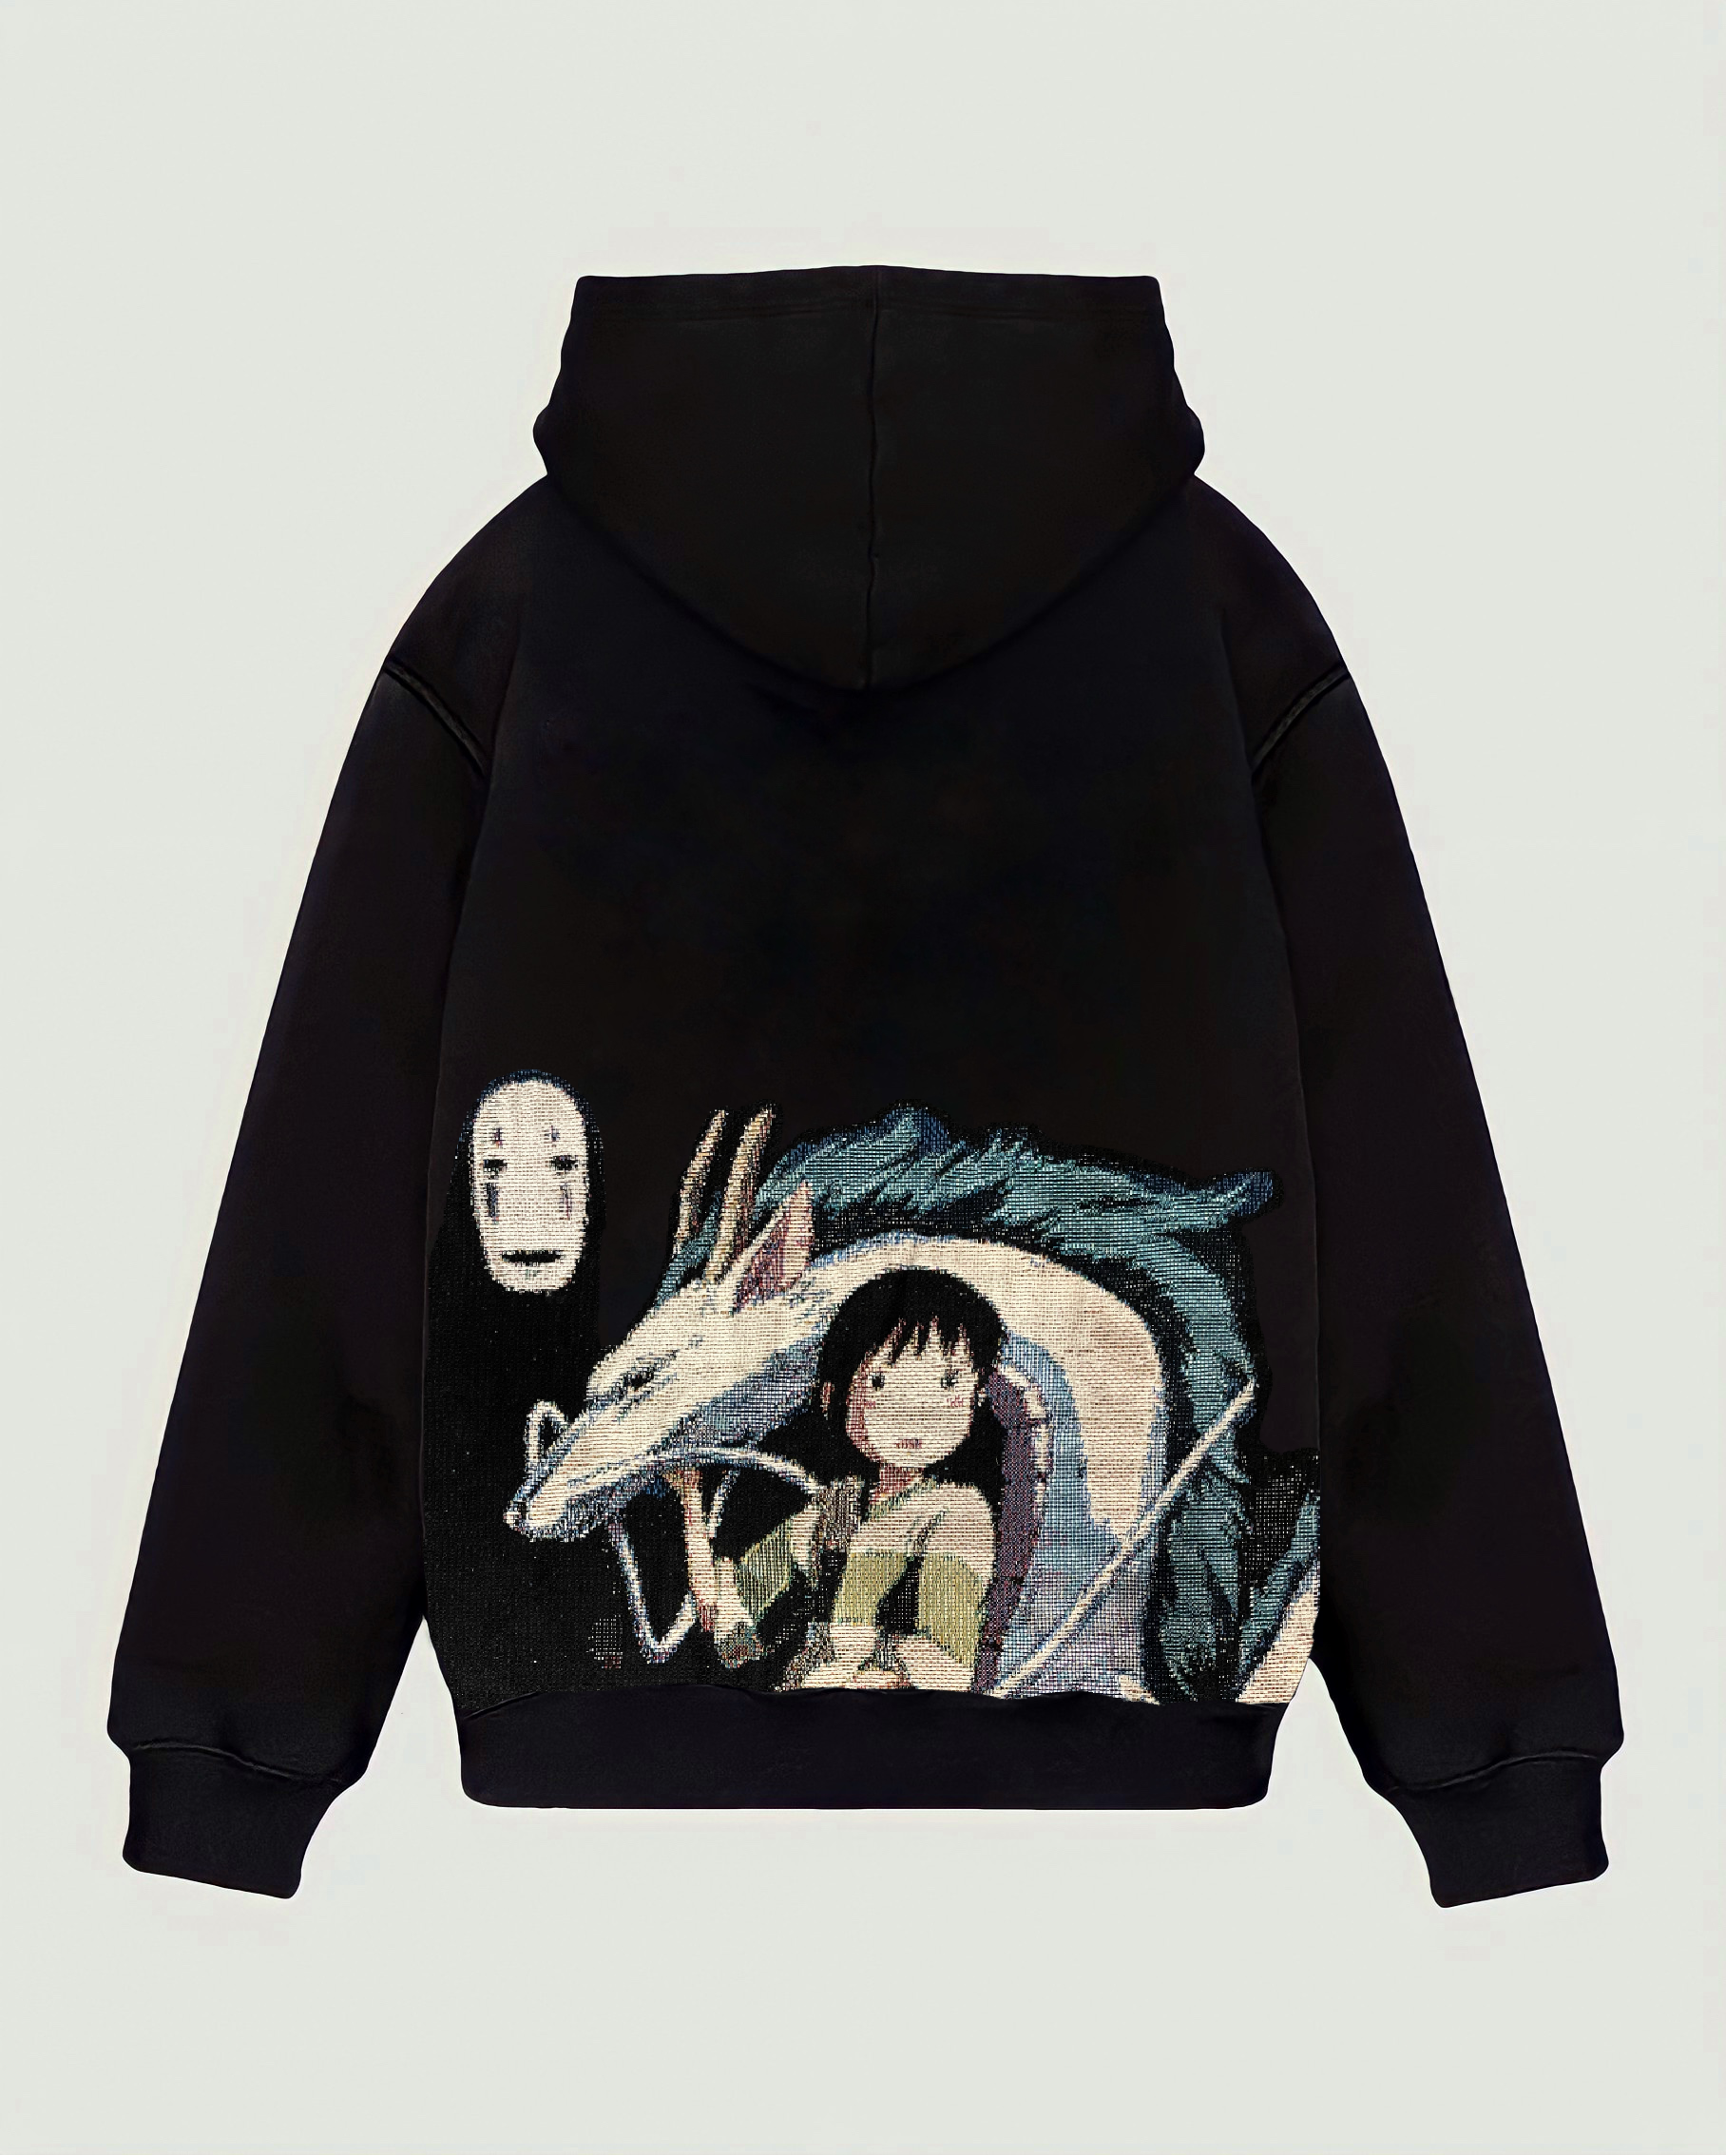 Blue World Tapestry Sweatshirt - The Episodes Project